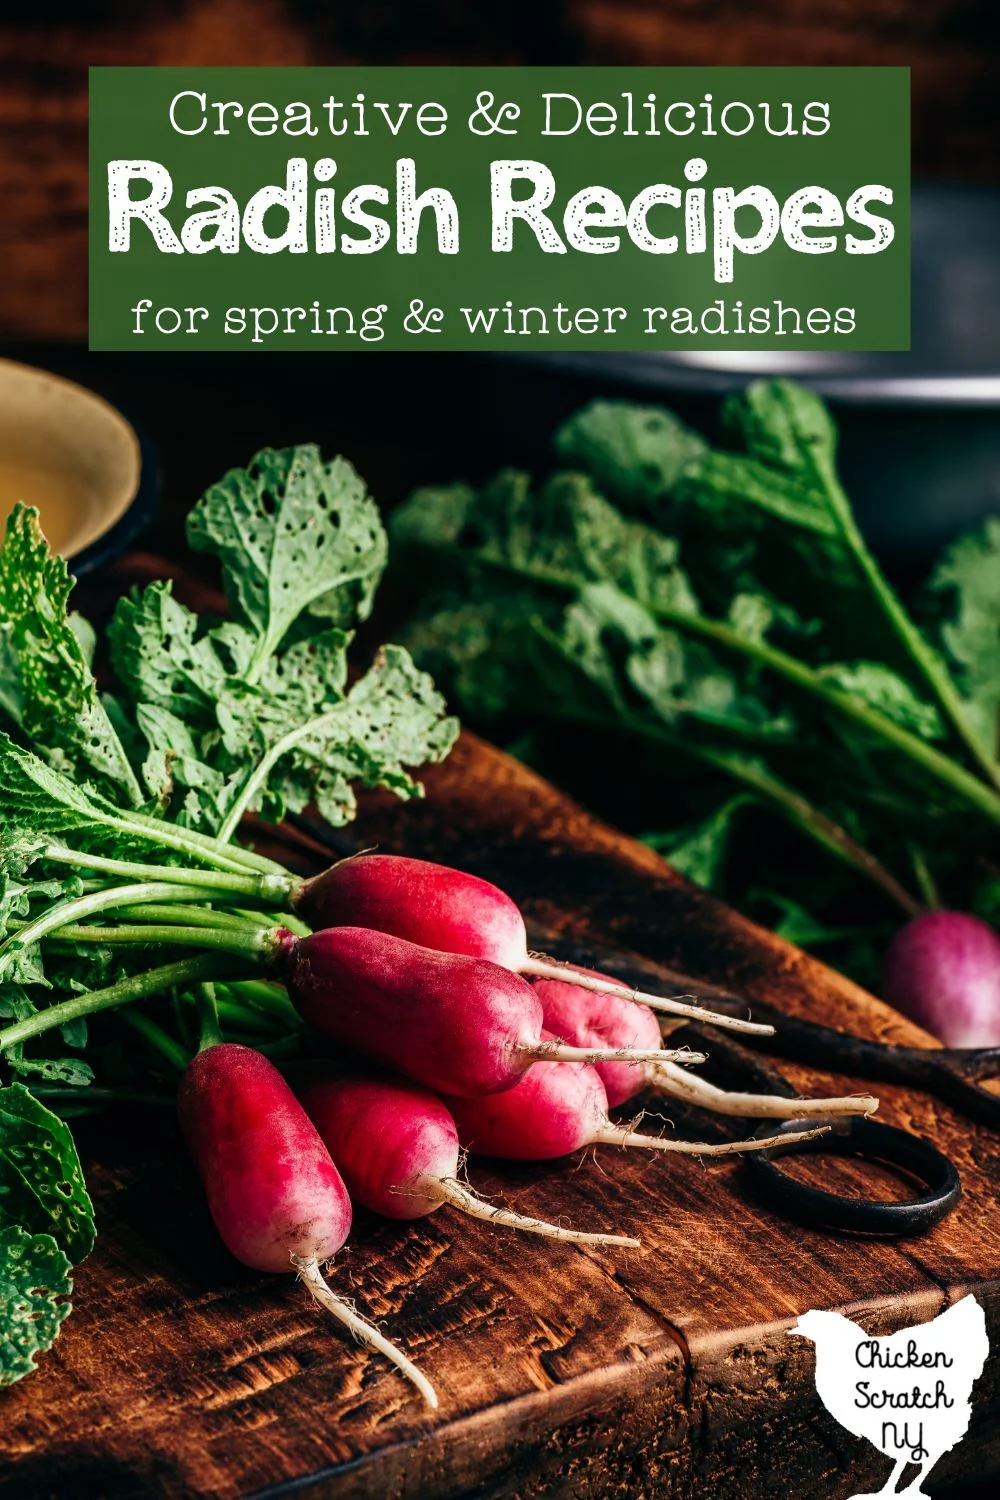 radishes on a cutting board with text overlay "creative and delicious Radish recipes for spring & winter radishes"